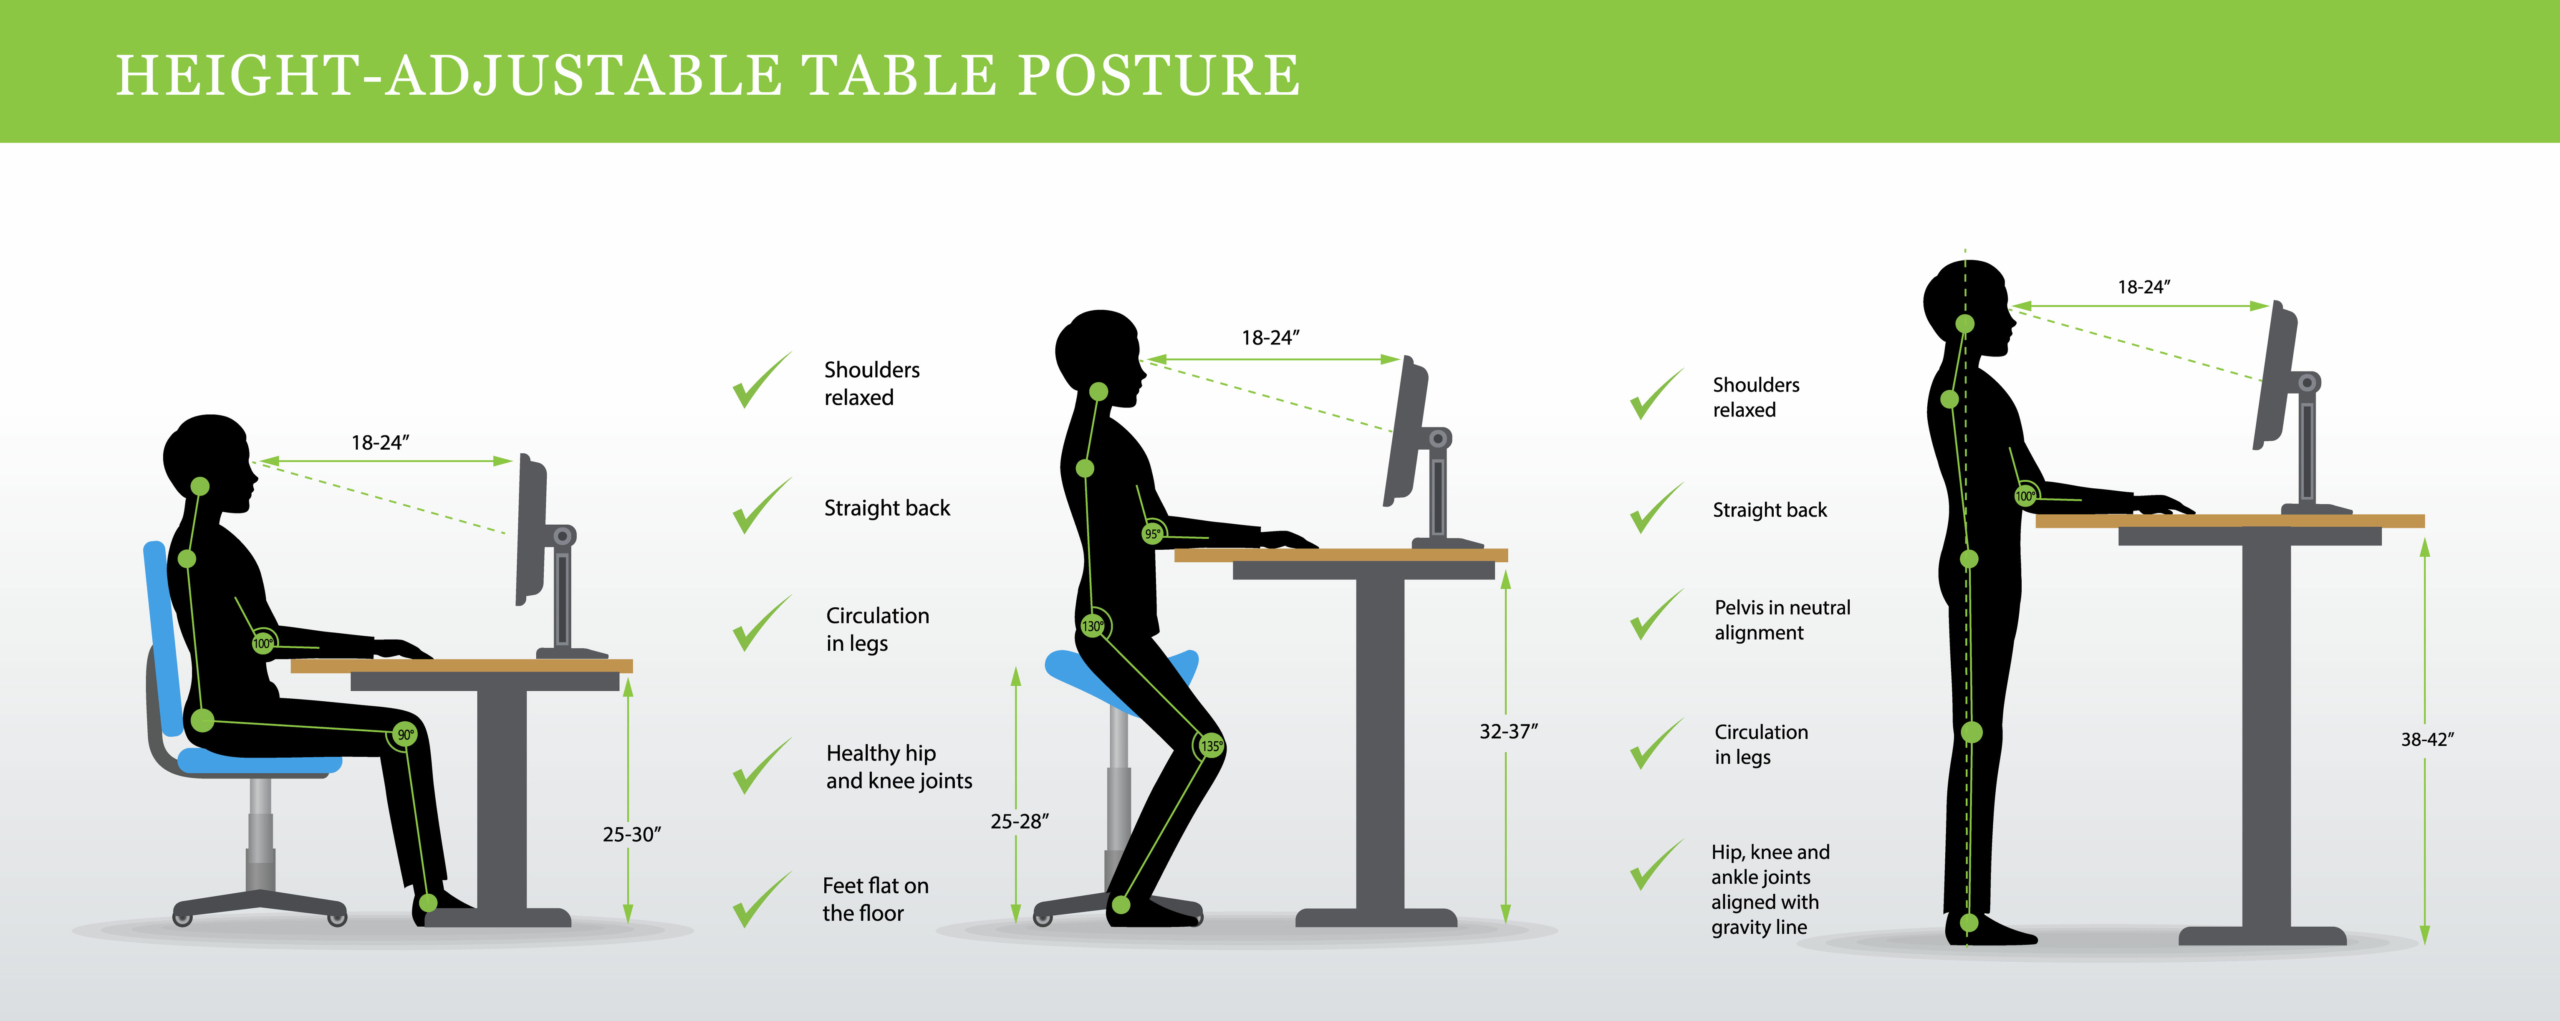 Height-Adjustable Table Posture for ergonomically correct workspace